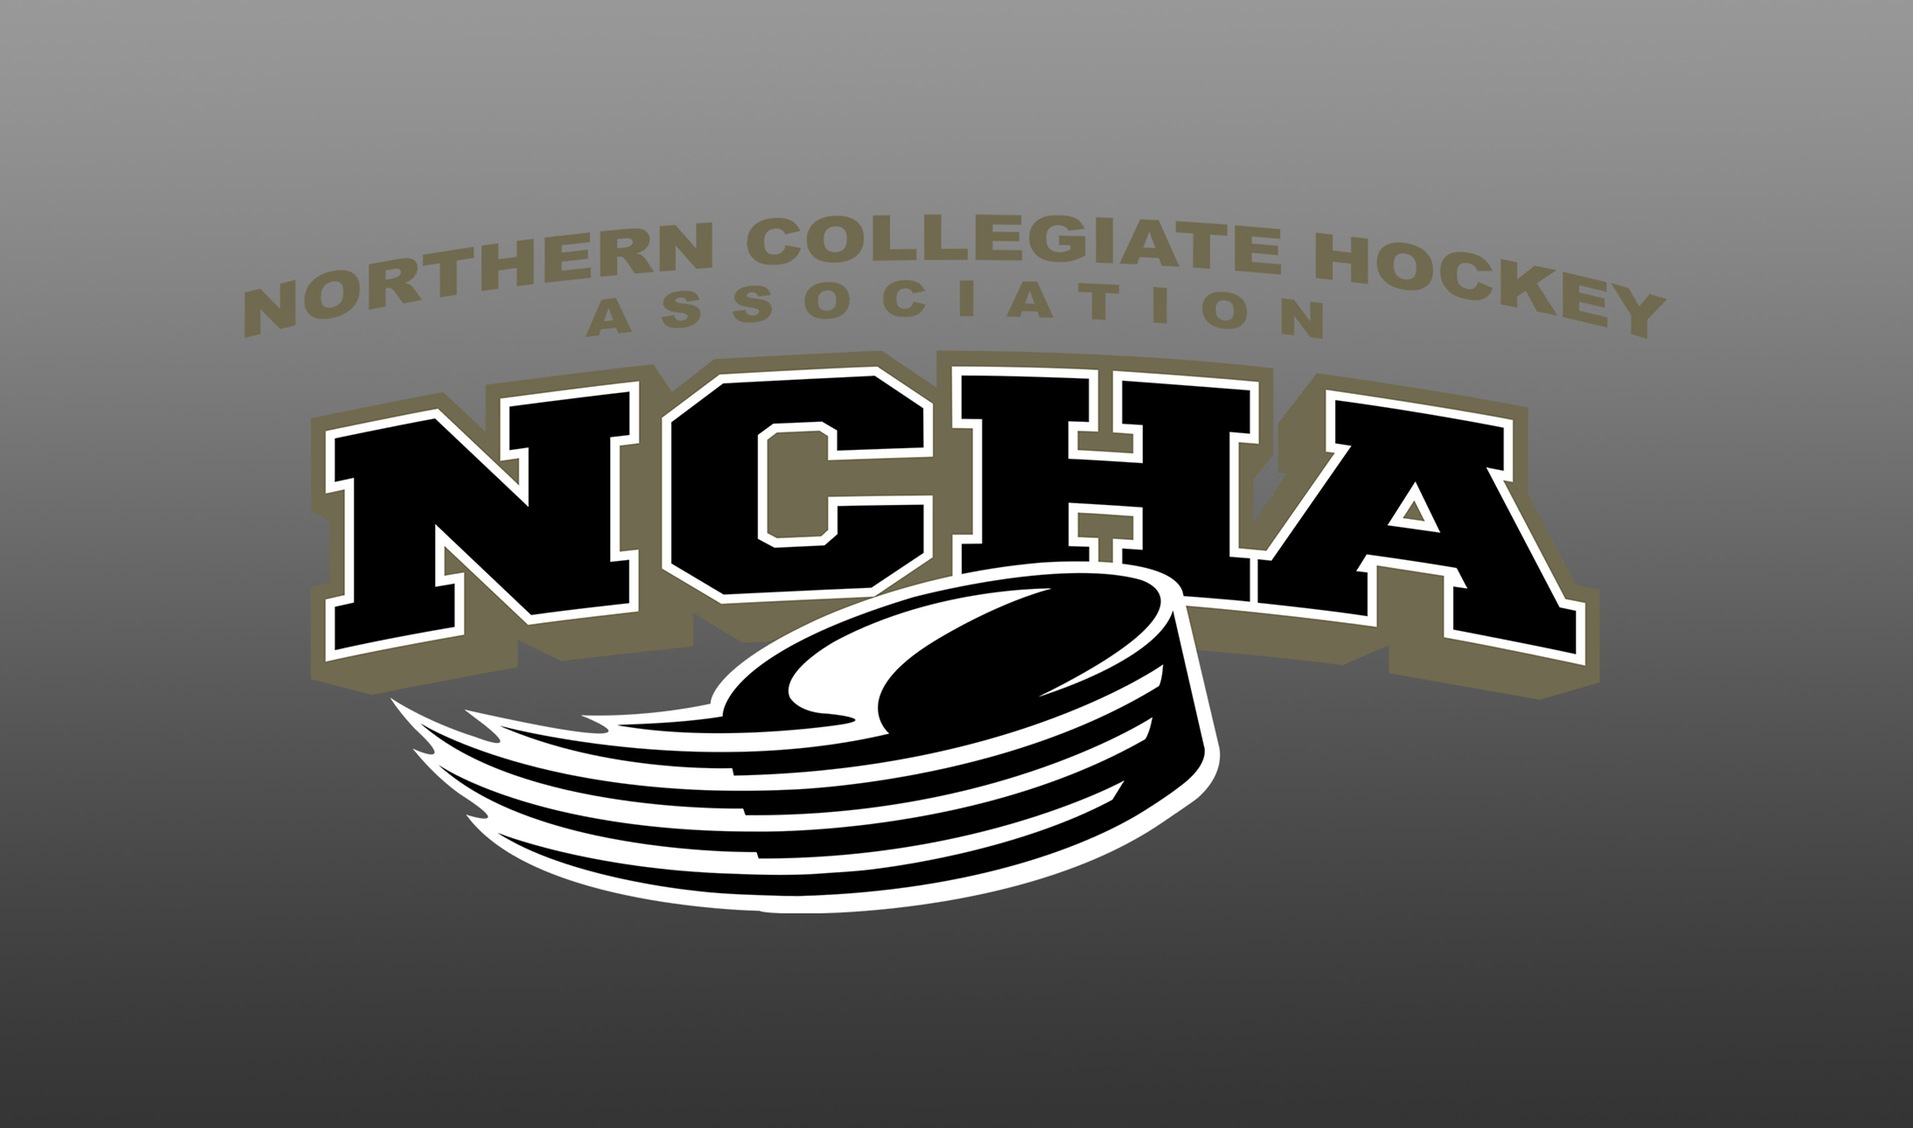 NCHA Releases Divisional League Schedule and Rule Changes for 2021